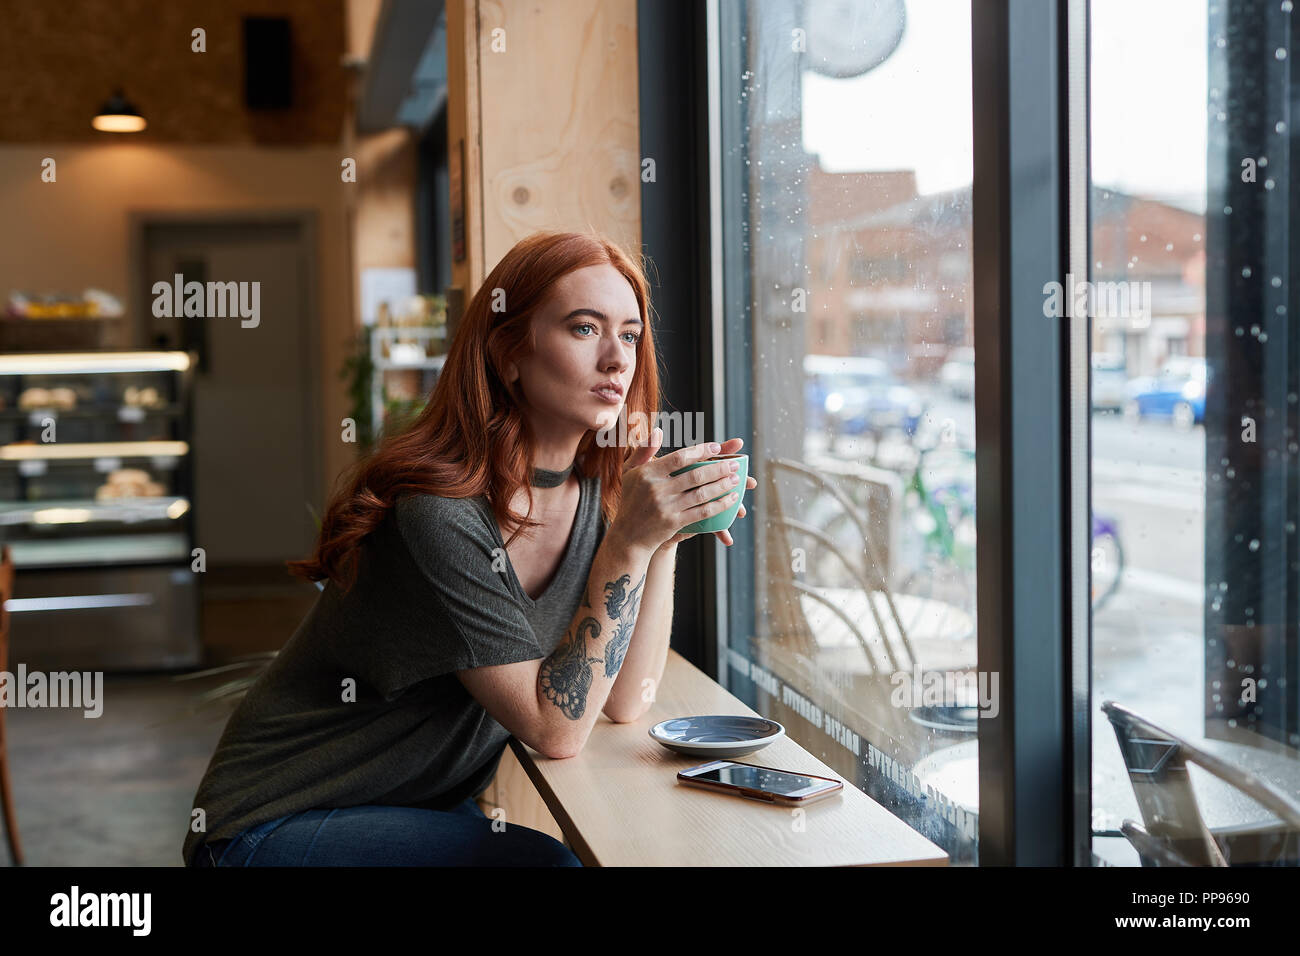 Red Head girl wIth arm Tattoo, sitting alone in a cafe looking through the window, Liverpool, UK Stock Photo